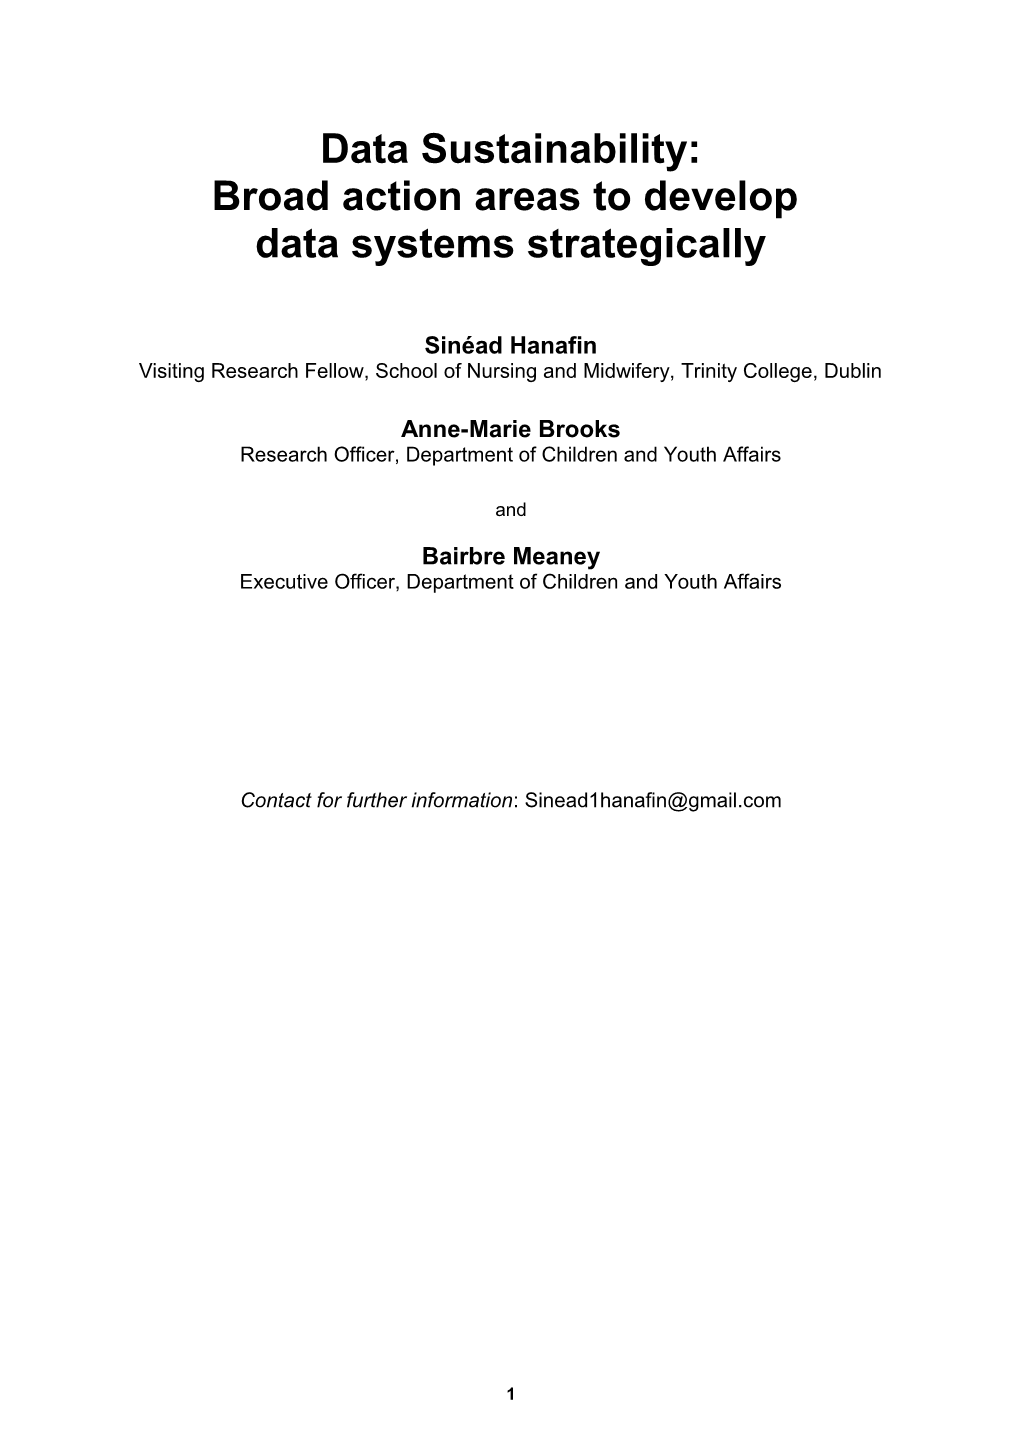 Data Sustainability: a Preliminary Typology to Strategically Develop Data Systems